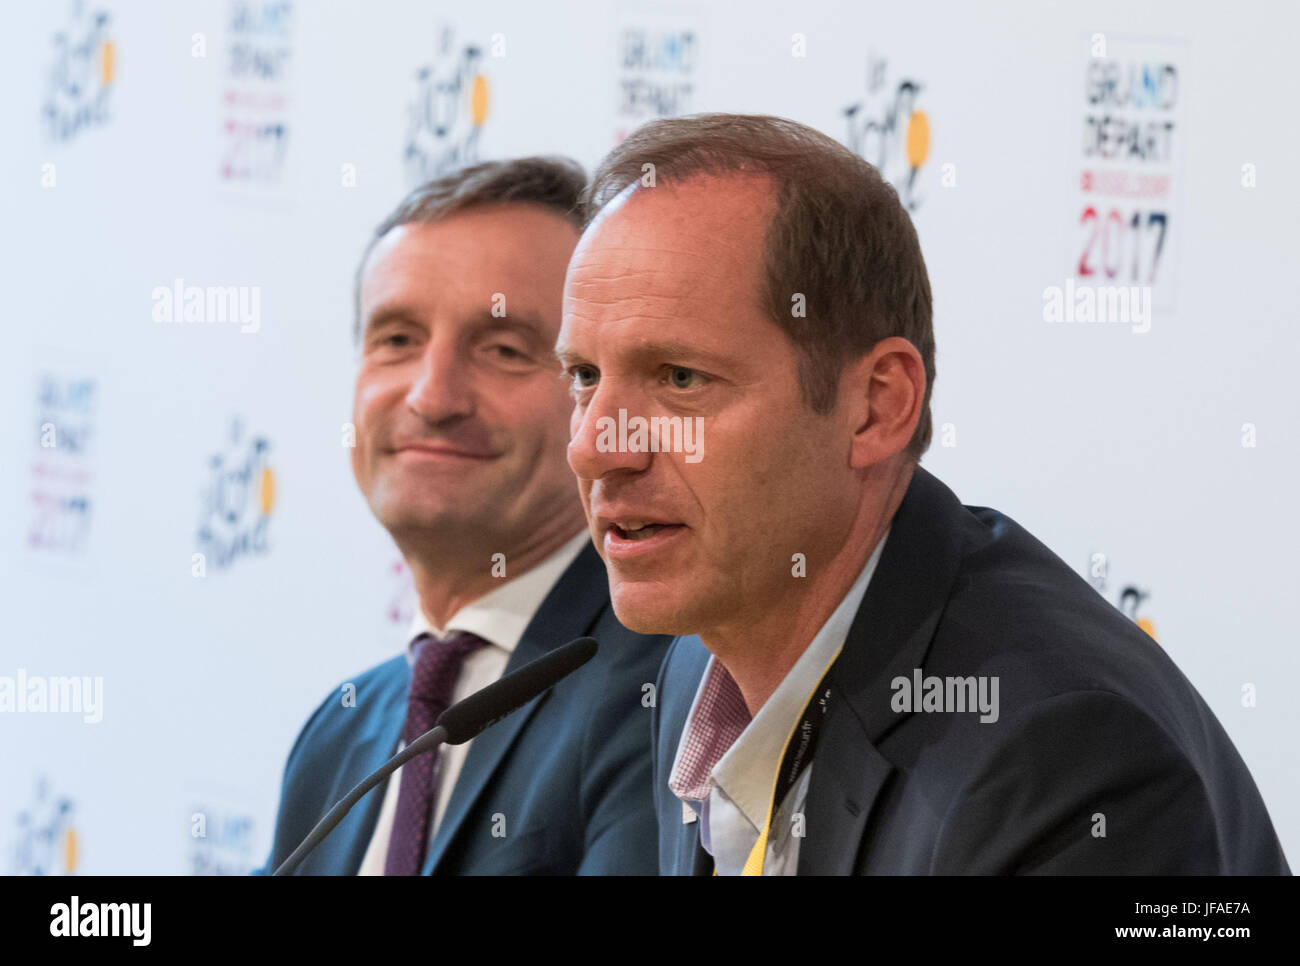 Duesseldorf, Germany. 30th June, 2017. Duesseldorf's Mayor Thomas Geisel (SPD, l) and the director of the Tour de France Christian Prudhomme, photographed during a press conference in Duesseldorf, Germany, 30 June 2017. Photo: Bernd Thissen/dpa/Alamy Live News Stock Photo